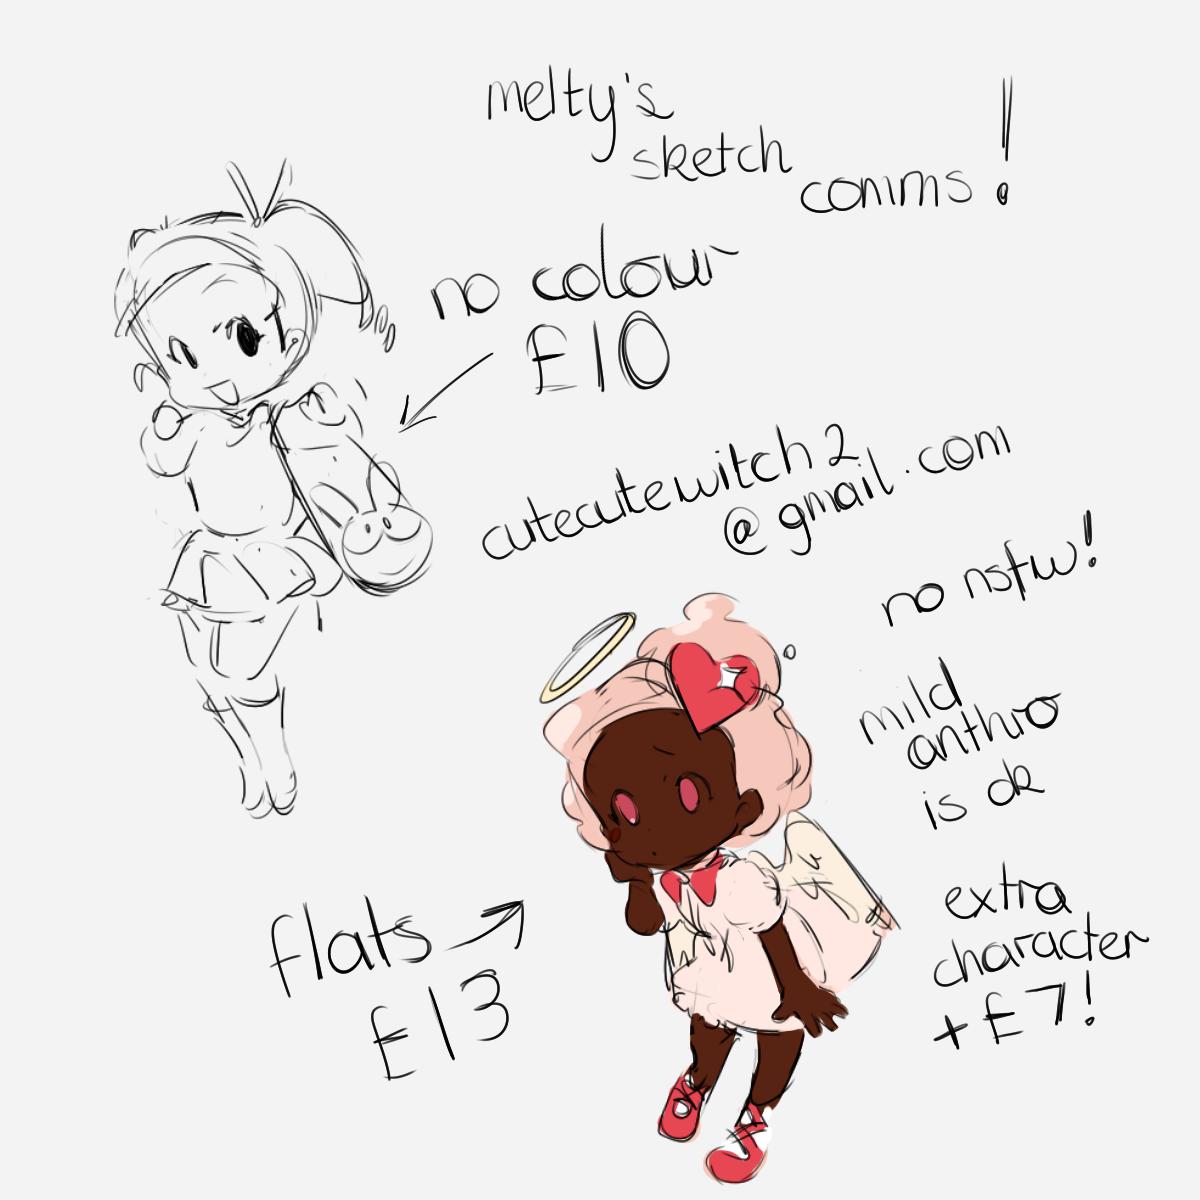 Hello! I'm now accepting sketch commissions in this style (I prefer doing sketchy art over lined/polished work). If you're interested please send an email with the subject "sketch commission request" to cutecutewitch2(@)gmail(.)com!
Please attach references. 